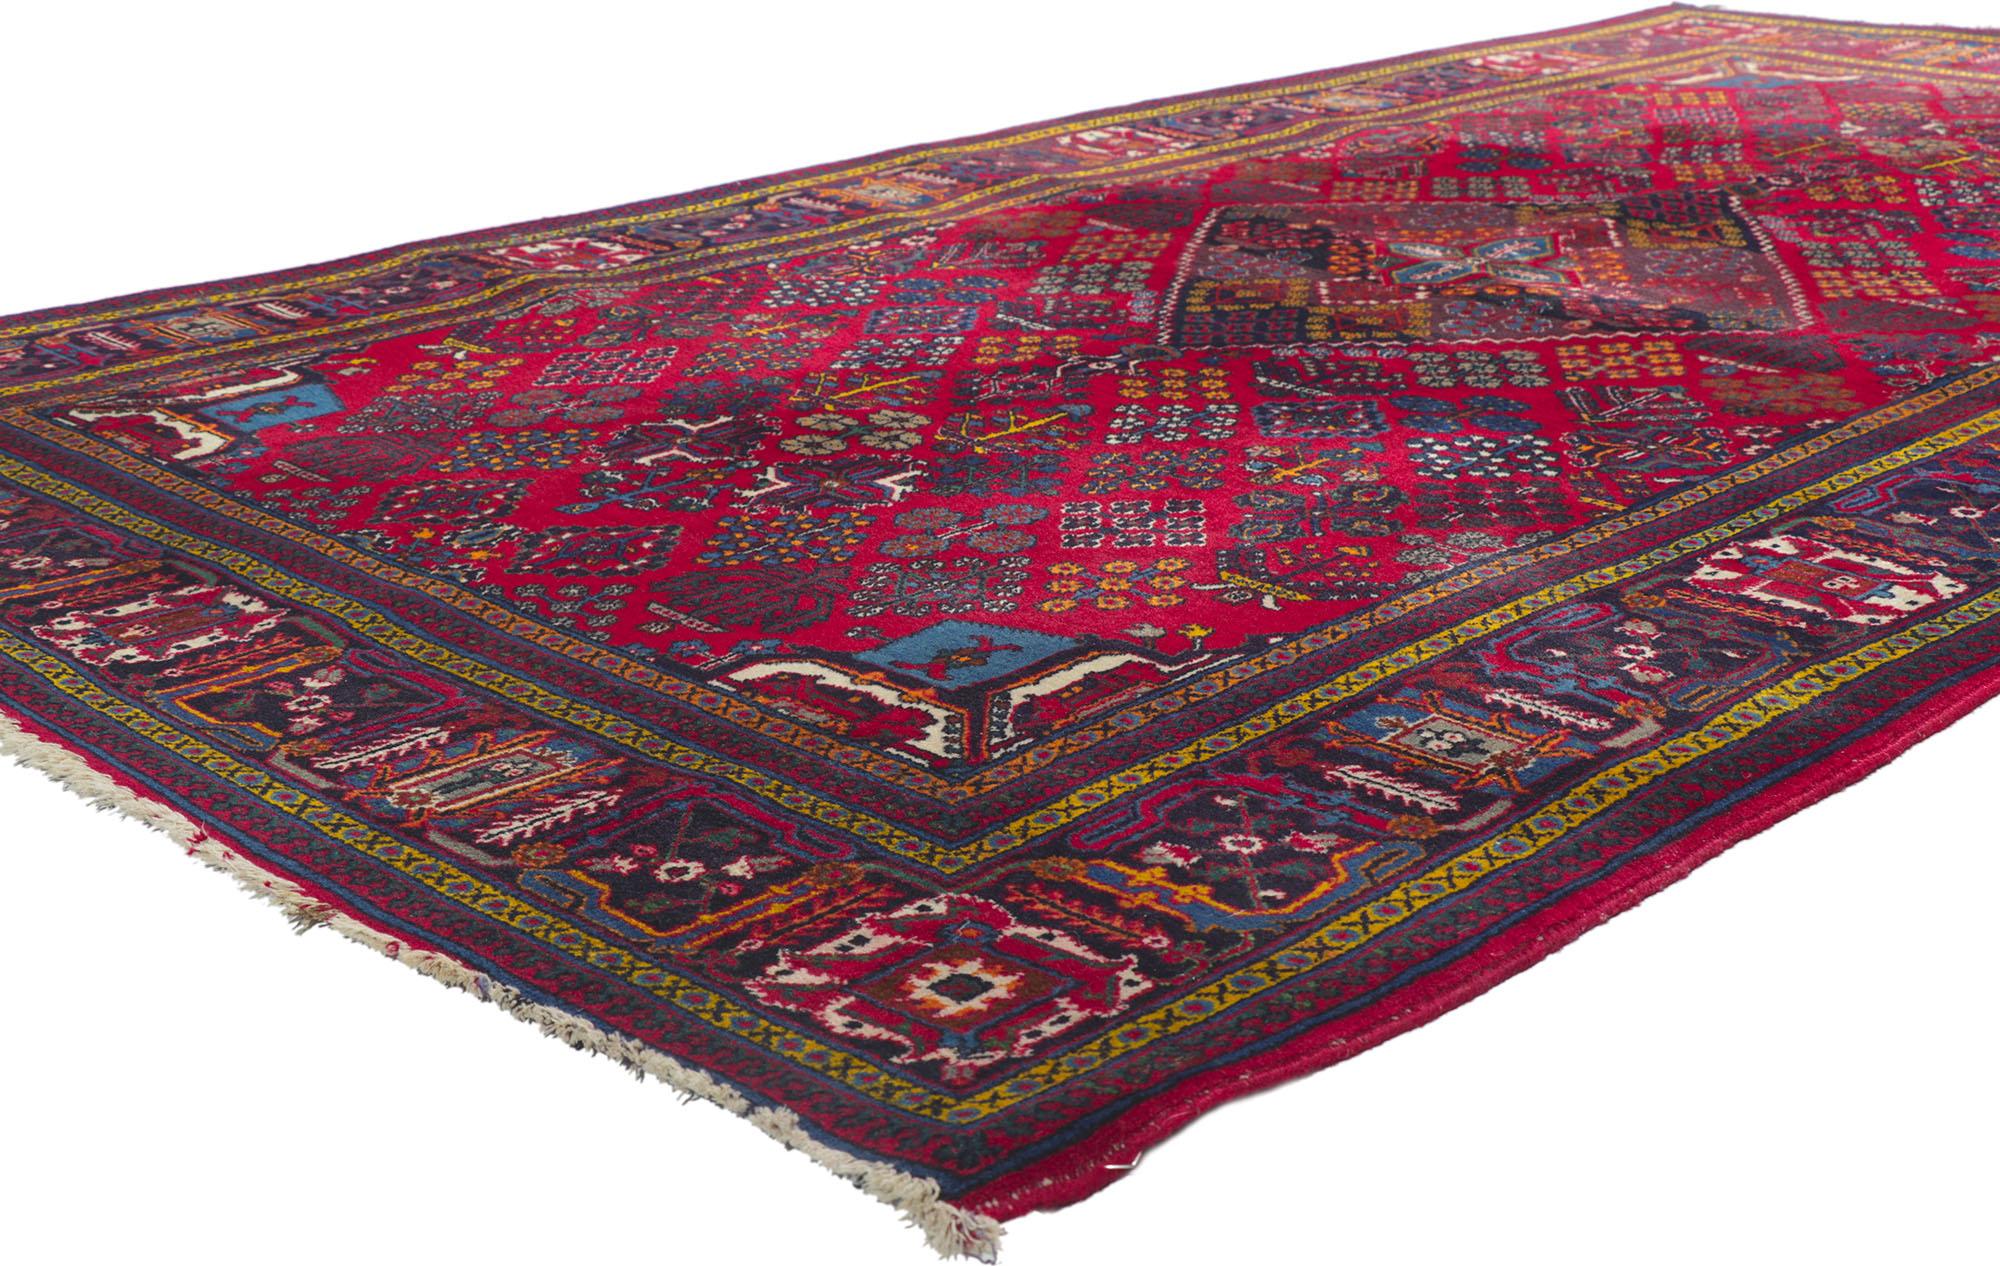 78181 Antique Persian Joshegan rug, 05'04 x 09'01. With timeless design and effortless beauty, this hand knotted wool antique Persian Joshegan rug is poised to impress. It features a central lozenge medallion filled decorated with a cross motif